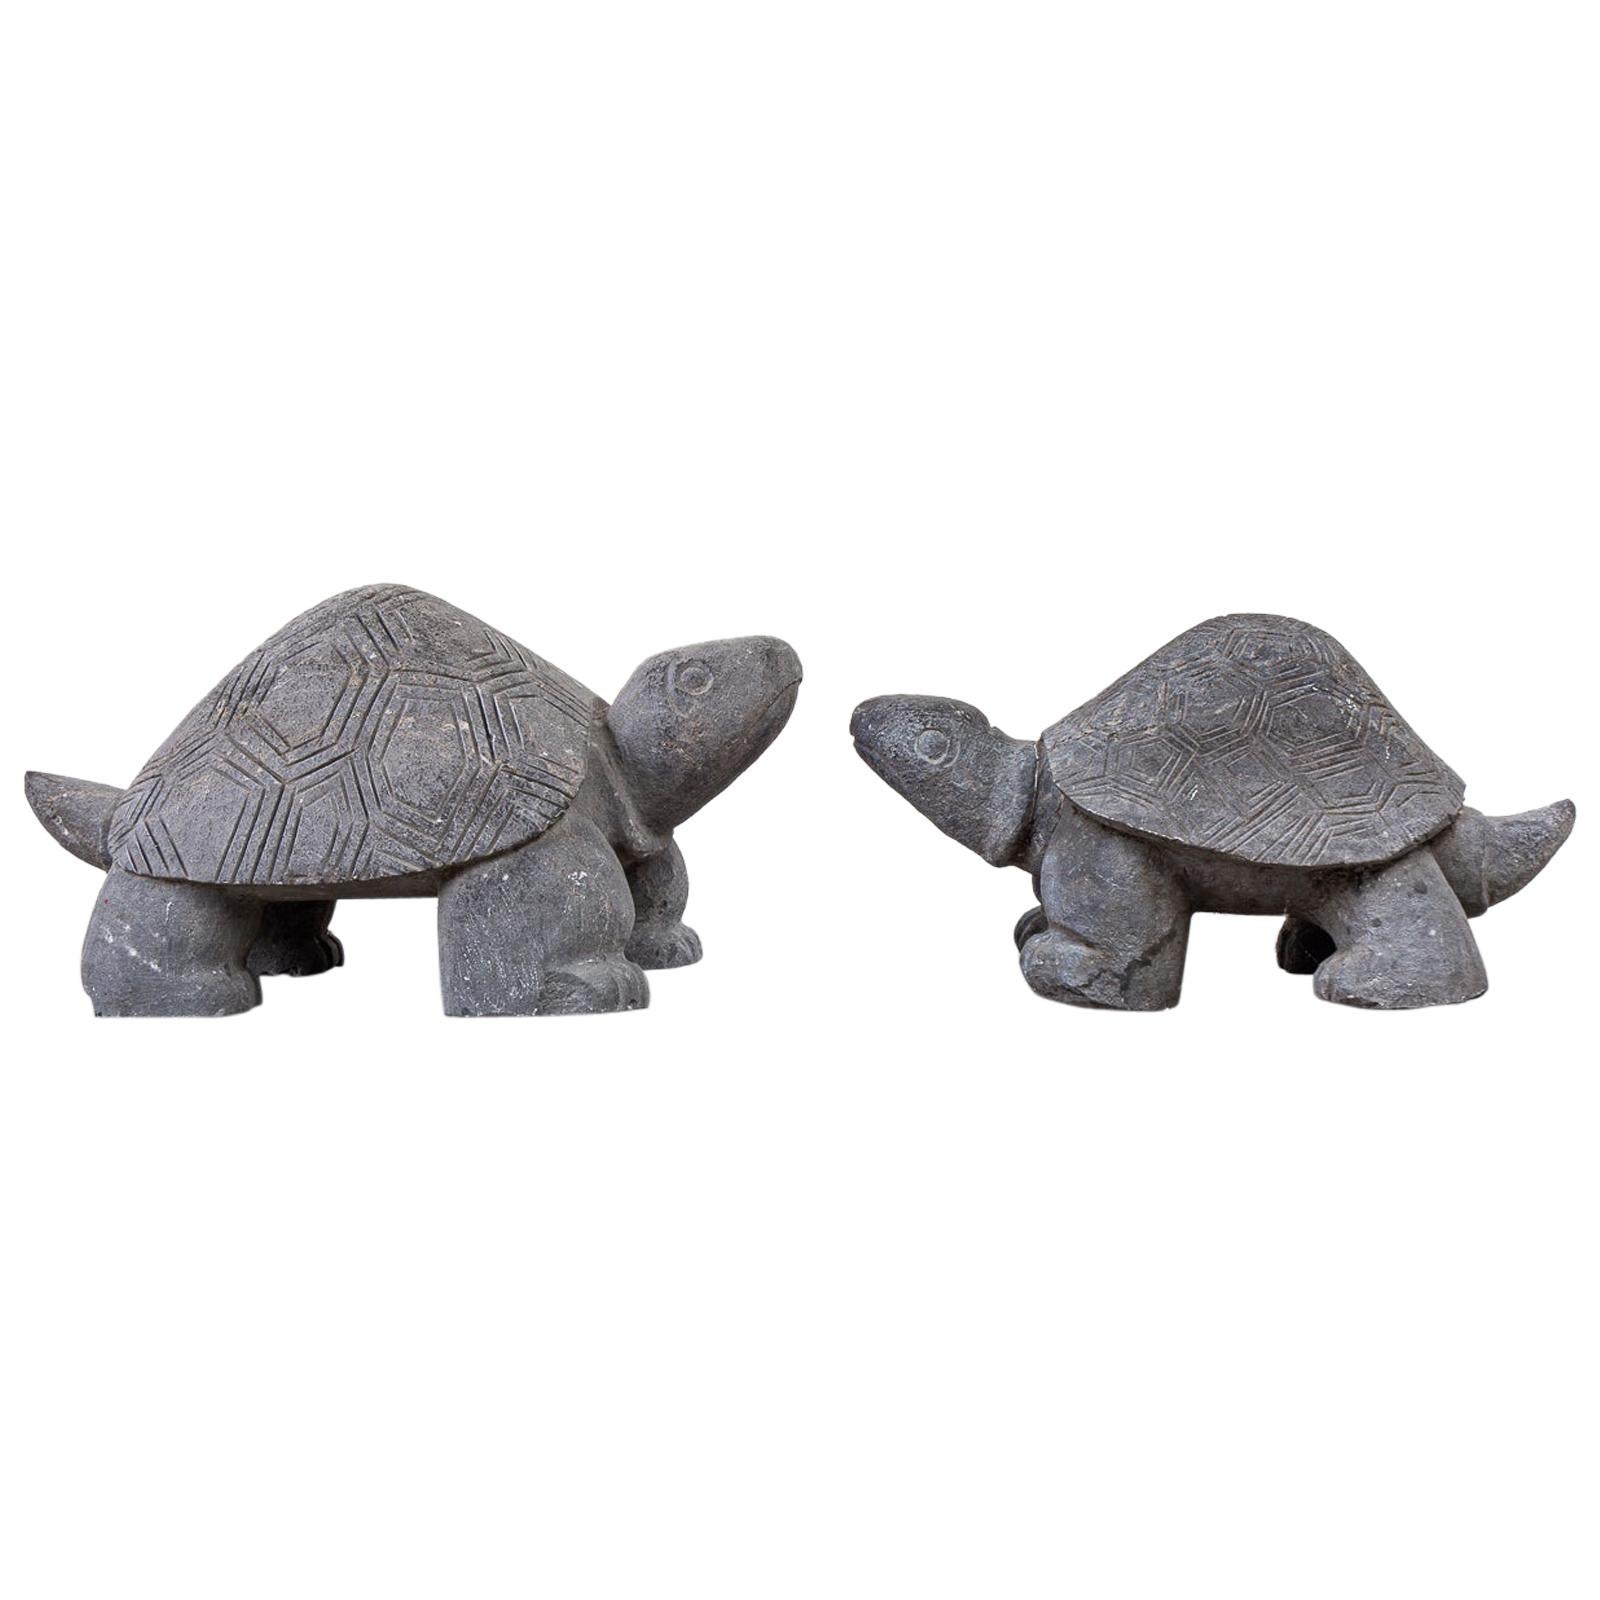 Pair of Carved Stone Turtle Sculptures